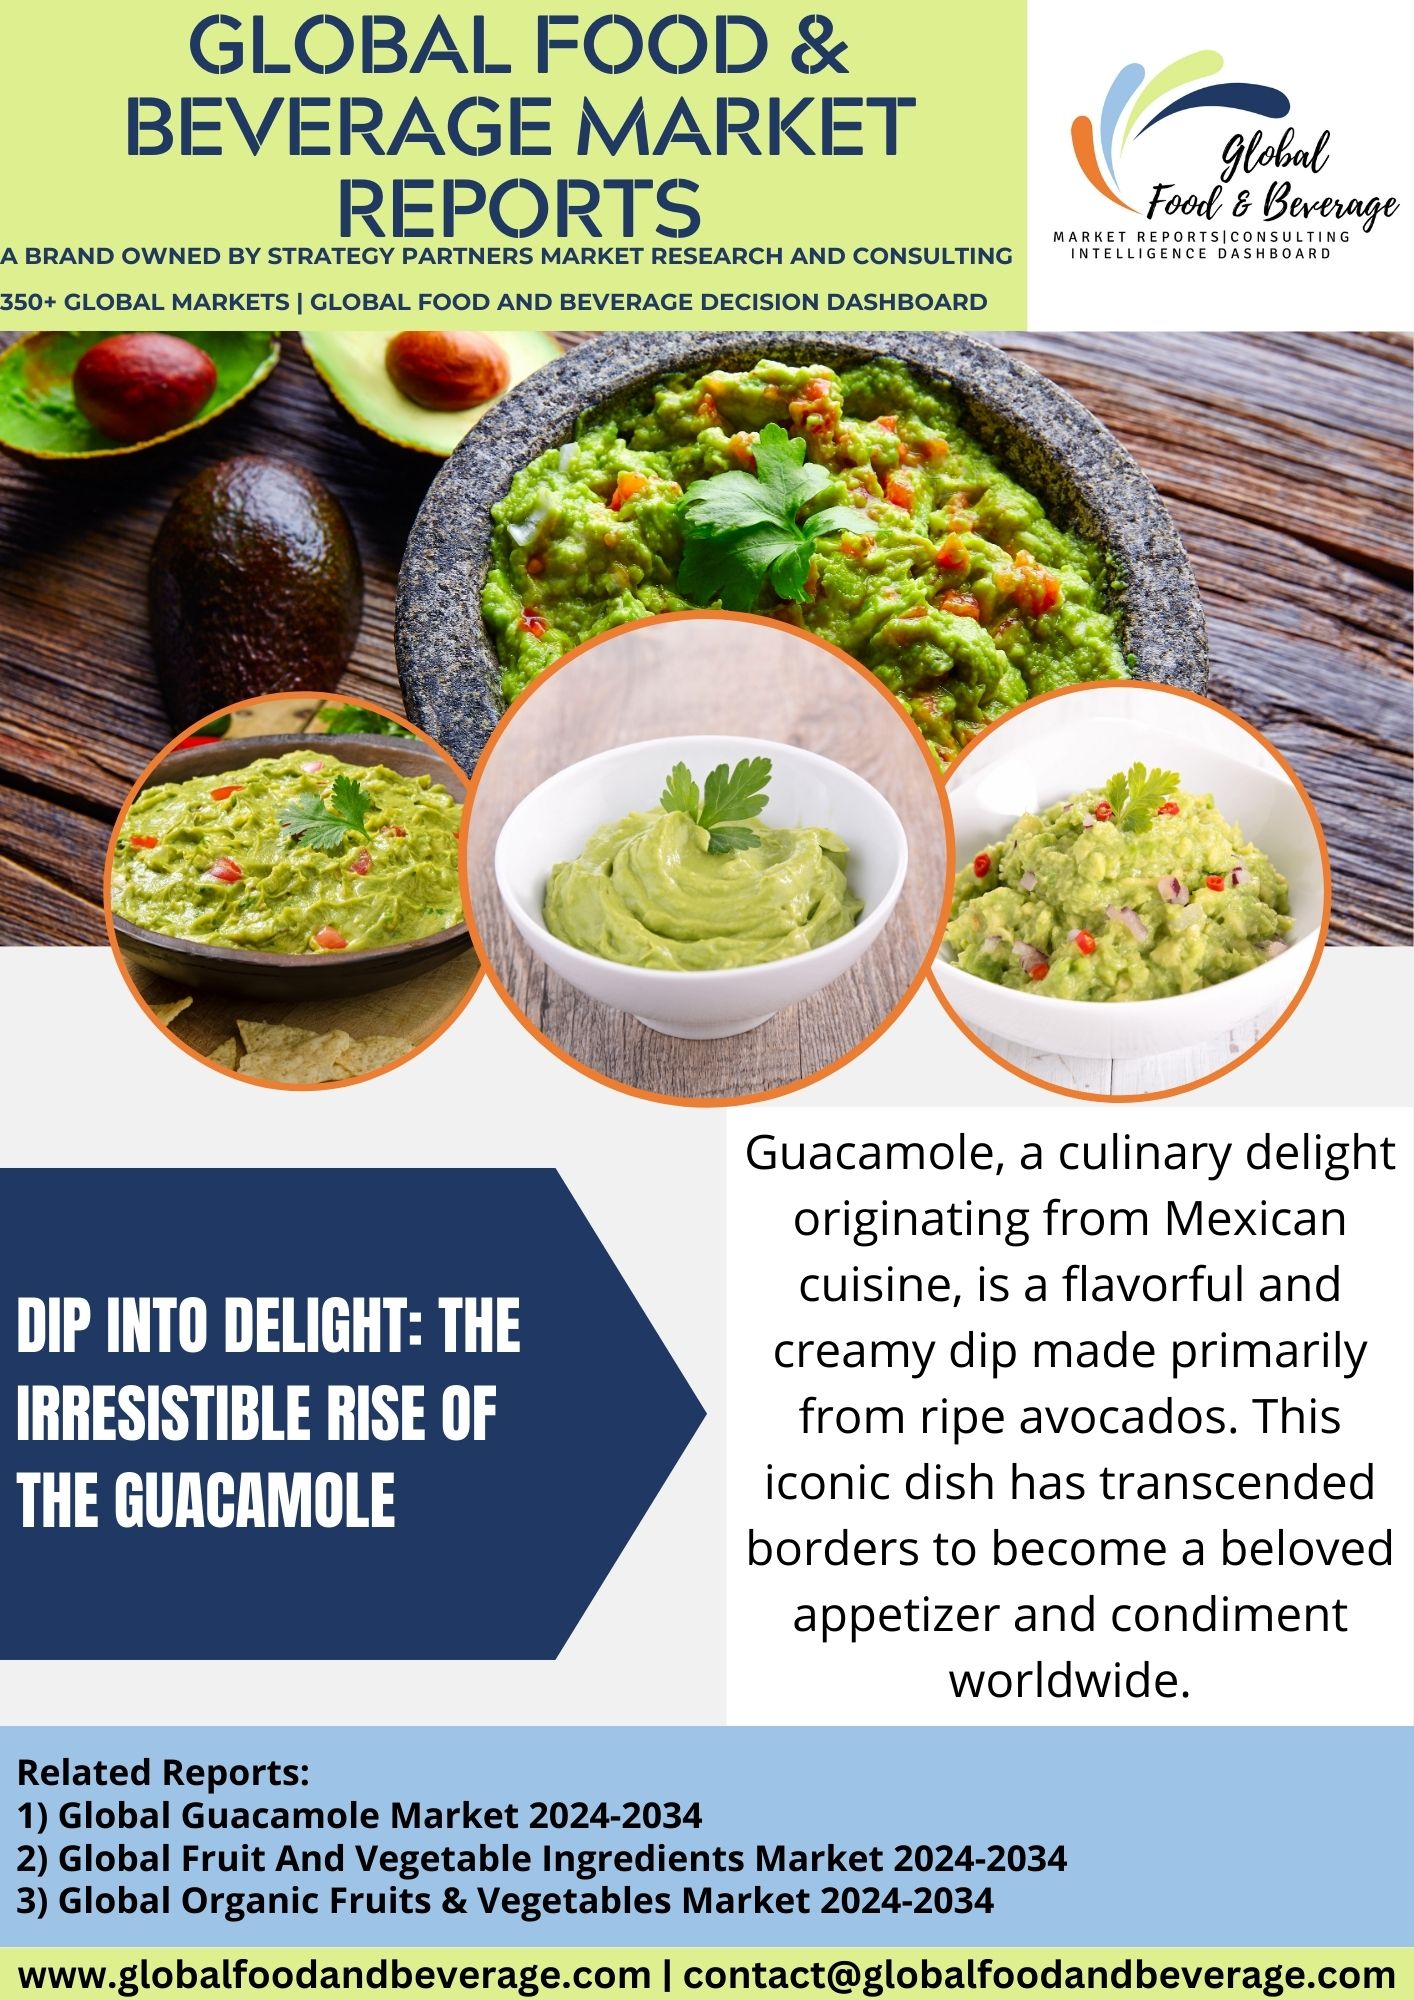 The Irresistible Rise of the Guacamole Market